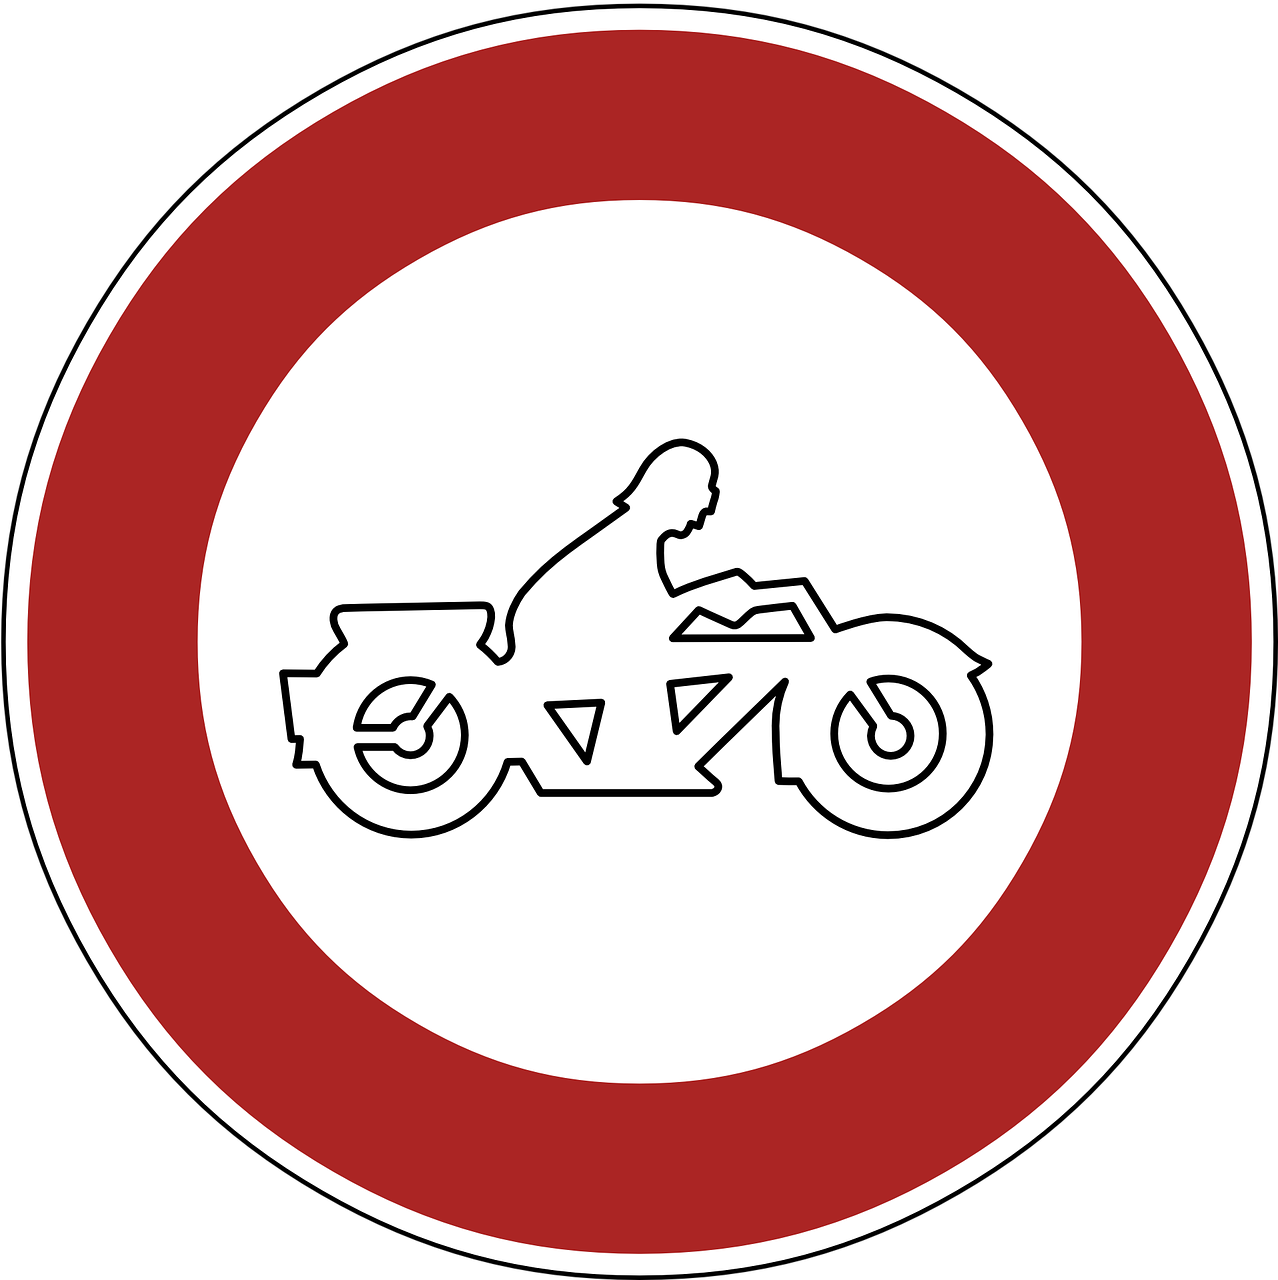 a red and white sign with a picture of a person riding a motorcycle, vector art, by Jan Zrzavý, pixabay, conceptual art, forbidden, round, white outline, roadster